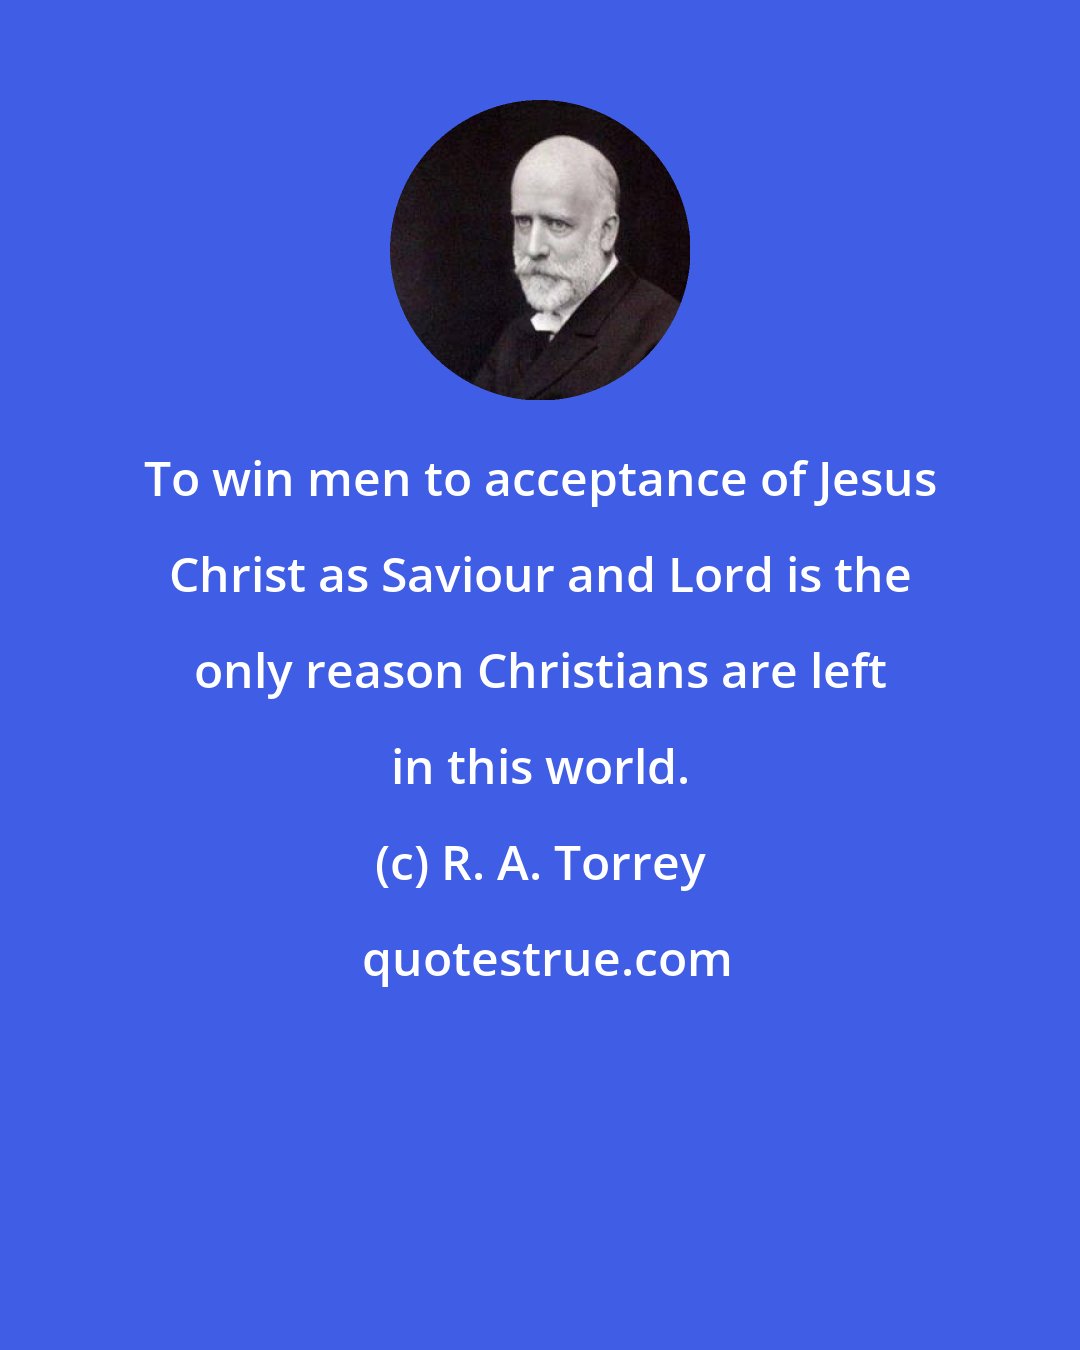 R. A. Torrey: To win men to acceptance of Jesus Christ as Saviour and Lord is the only reason Christians are left in this world.